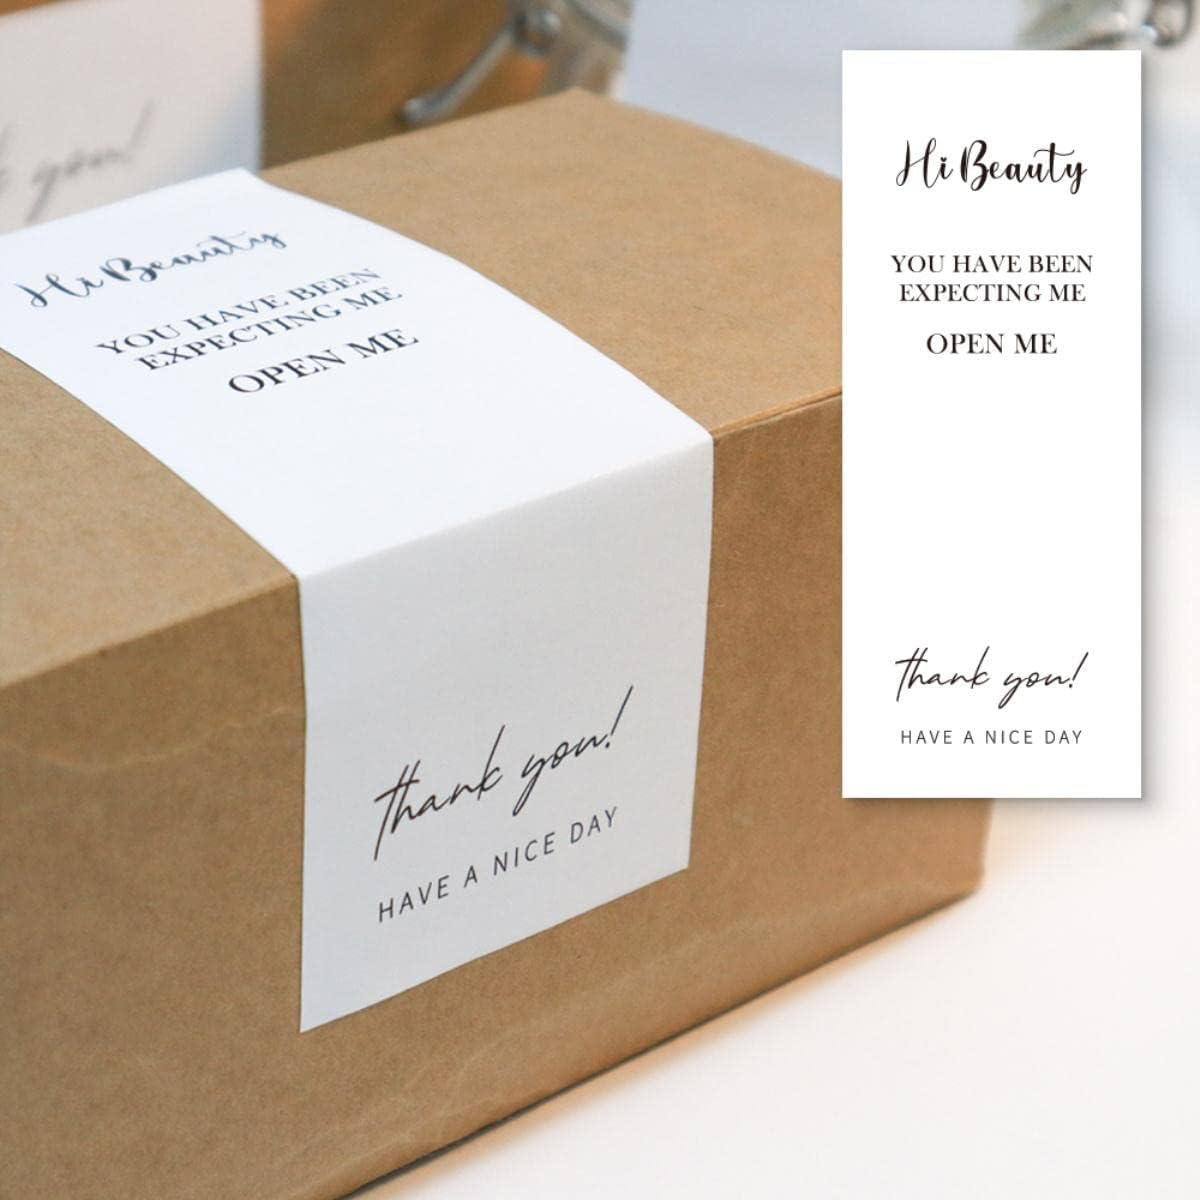 custom boxes with personalized labels